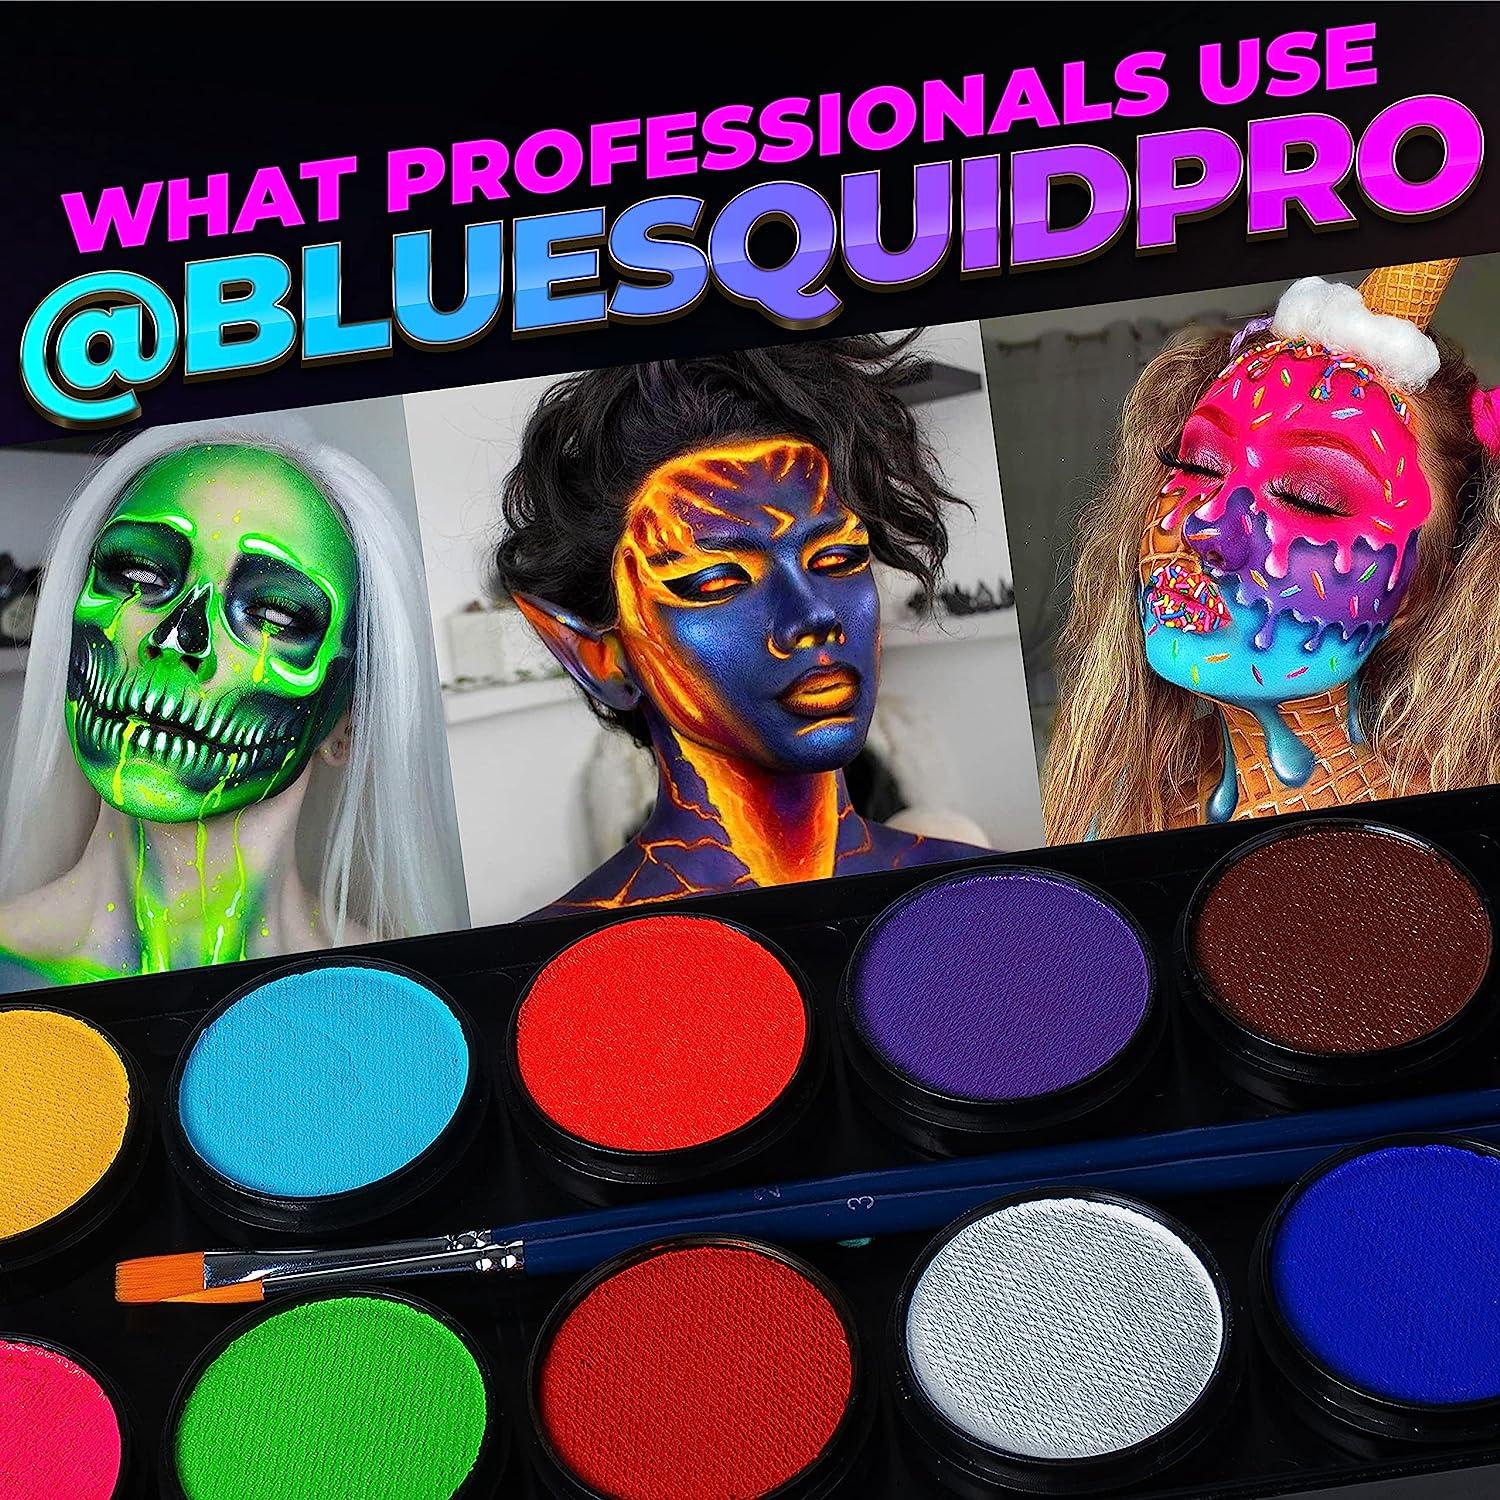 Professional Face Paint Kit - by Blue Squid PRO, 12x10g Classic Color  Palette, Professional Face & Body Painting Supplies SFX, Adult & Kids,  Superior